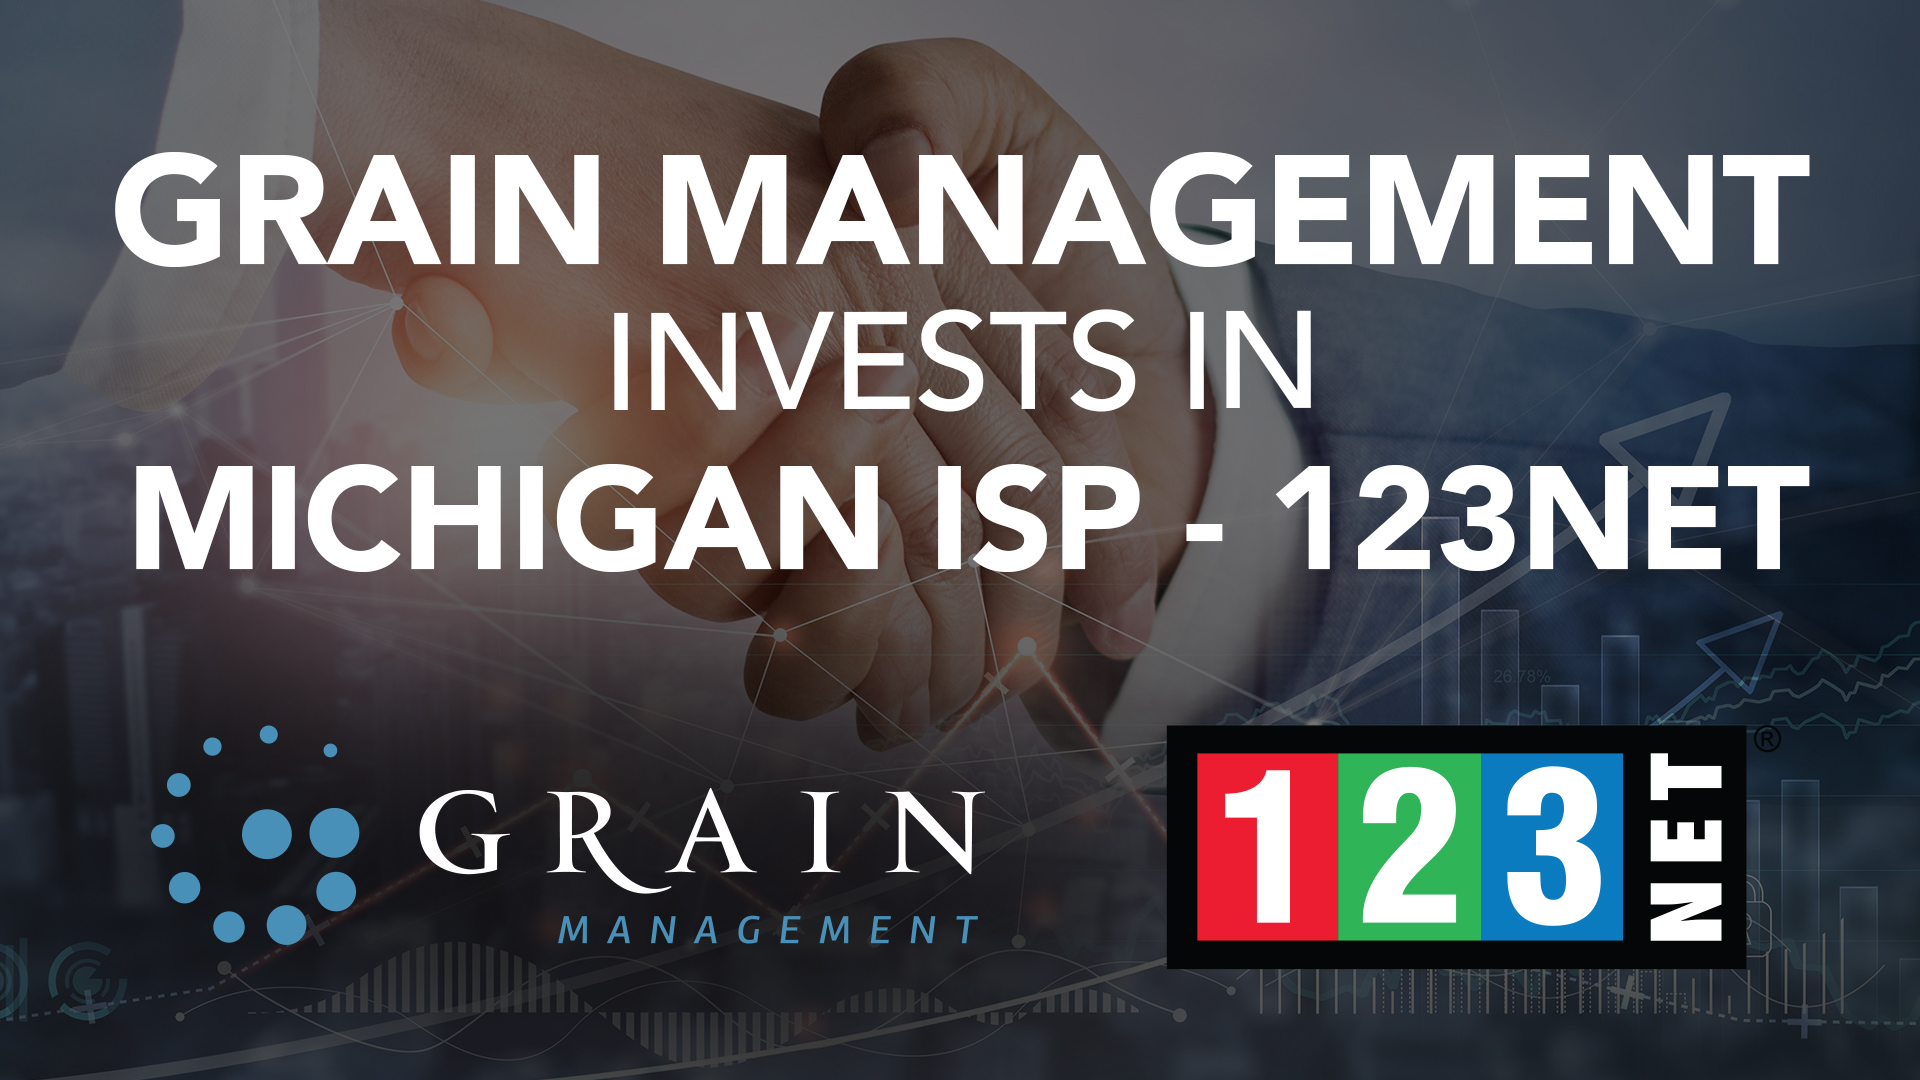 Grain Management Invests in Leading Michigan-based Telecom Provider, 123NET